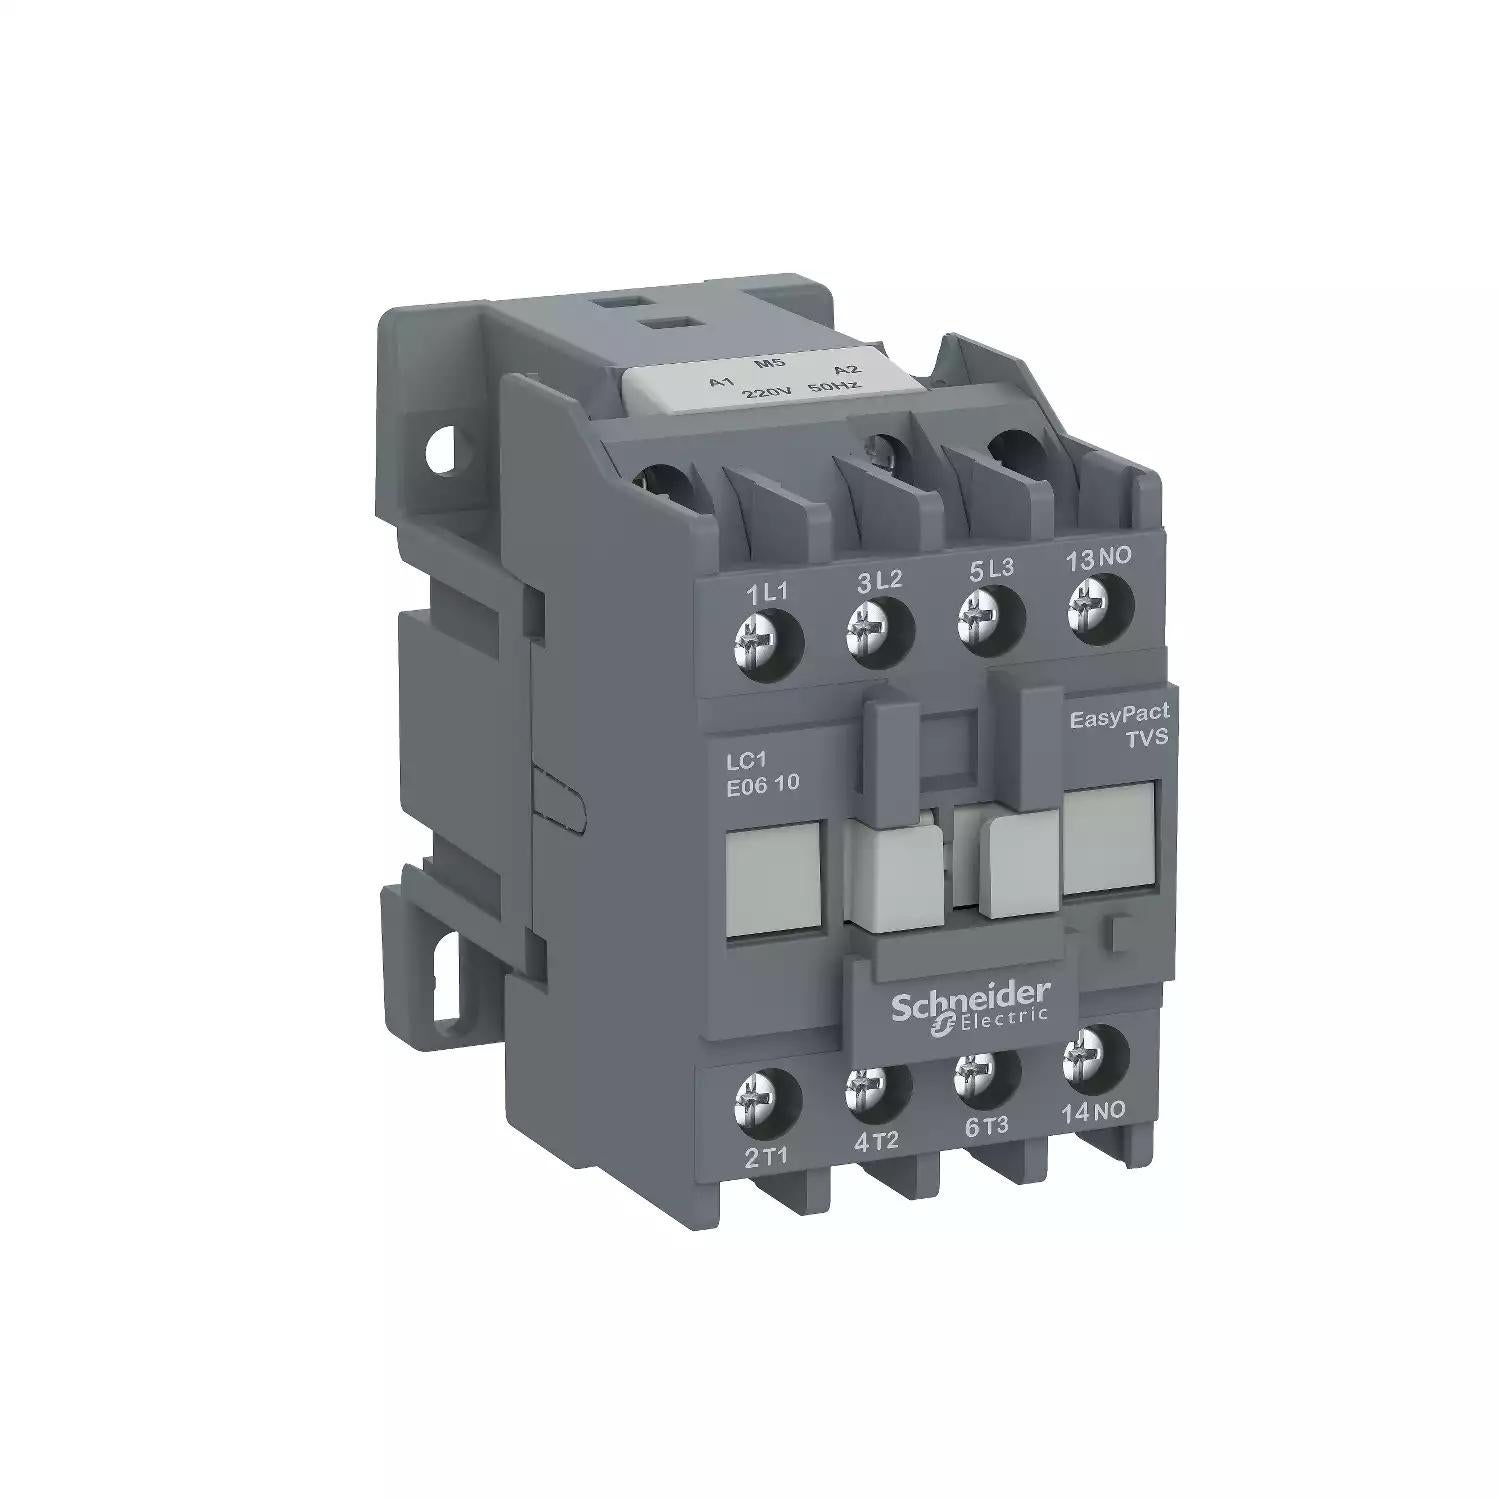 Contactor,EasyPact TVS,3P(3NO),AC-3,<lt/>=440V,9A,24V AC coil,50Hz,1NO auxiliary contact